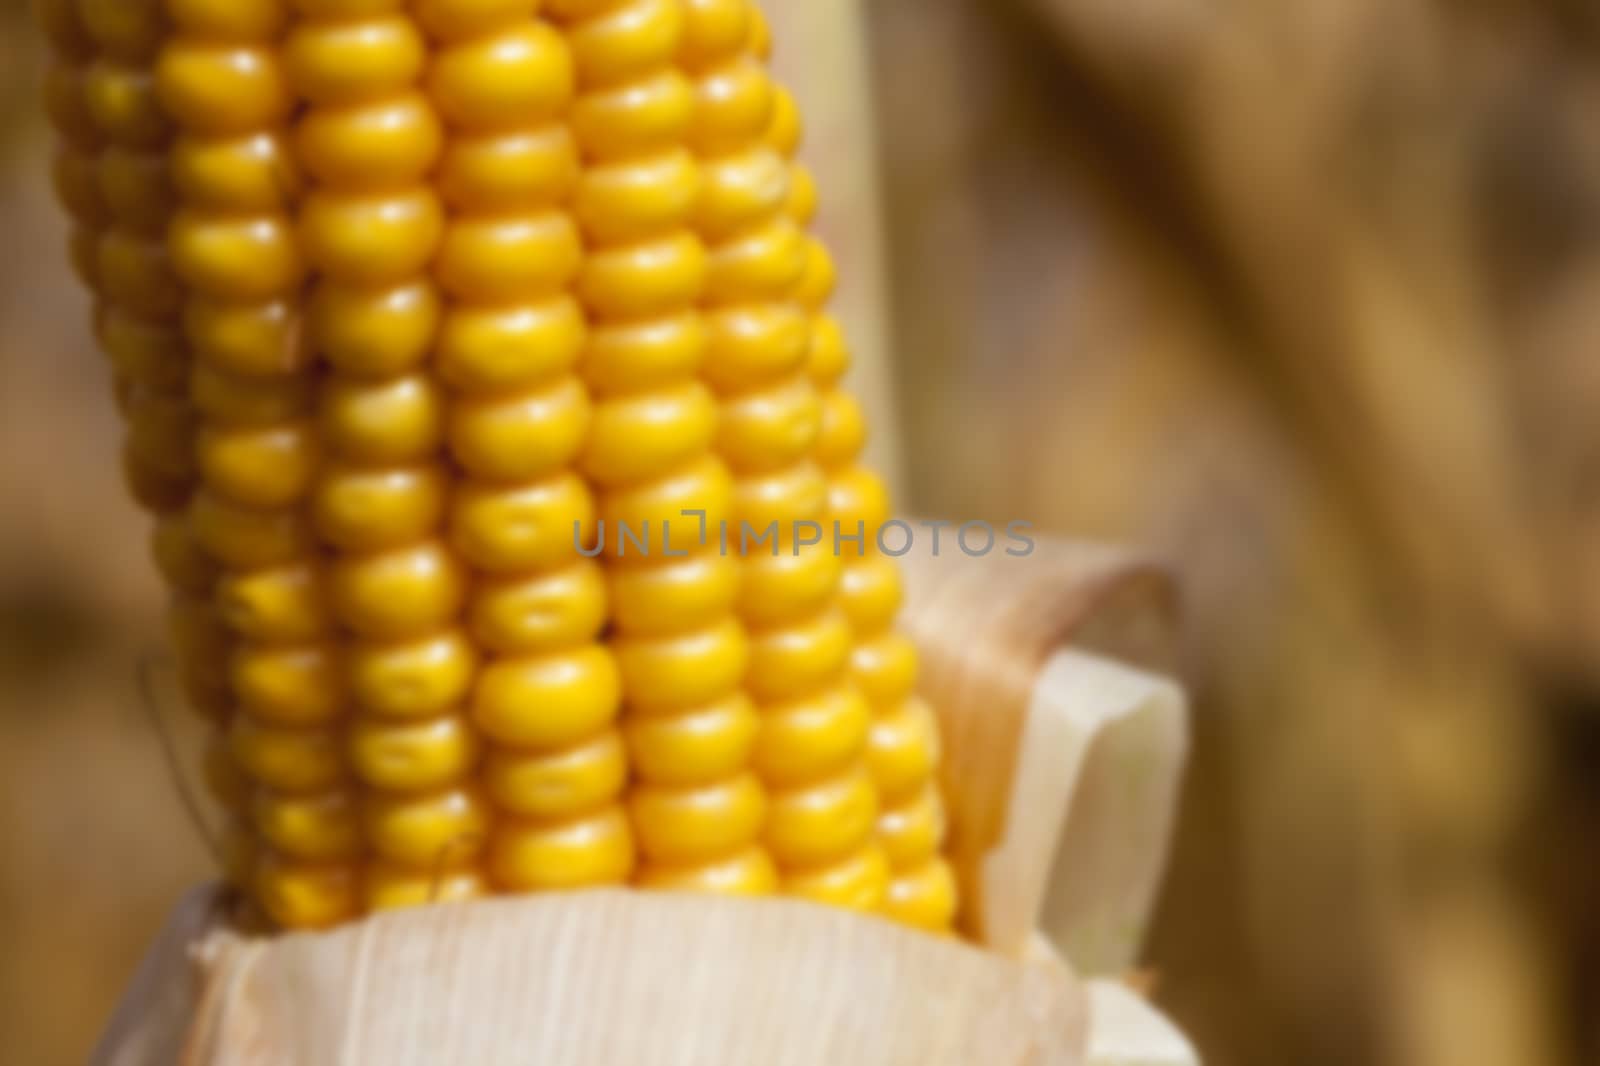 agricultural field where crops harvested mature corn yellowing, defocus